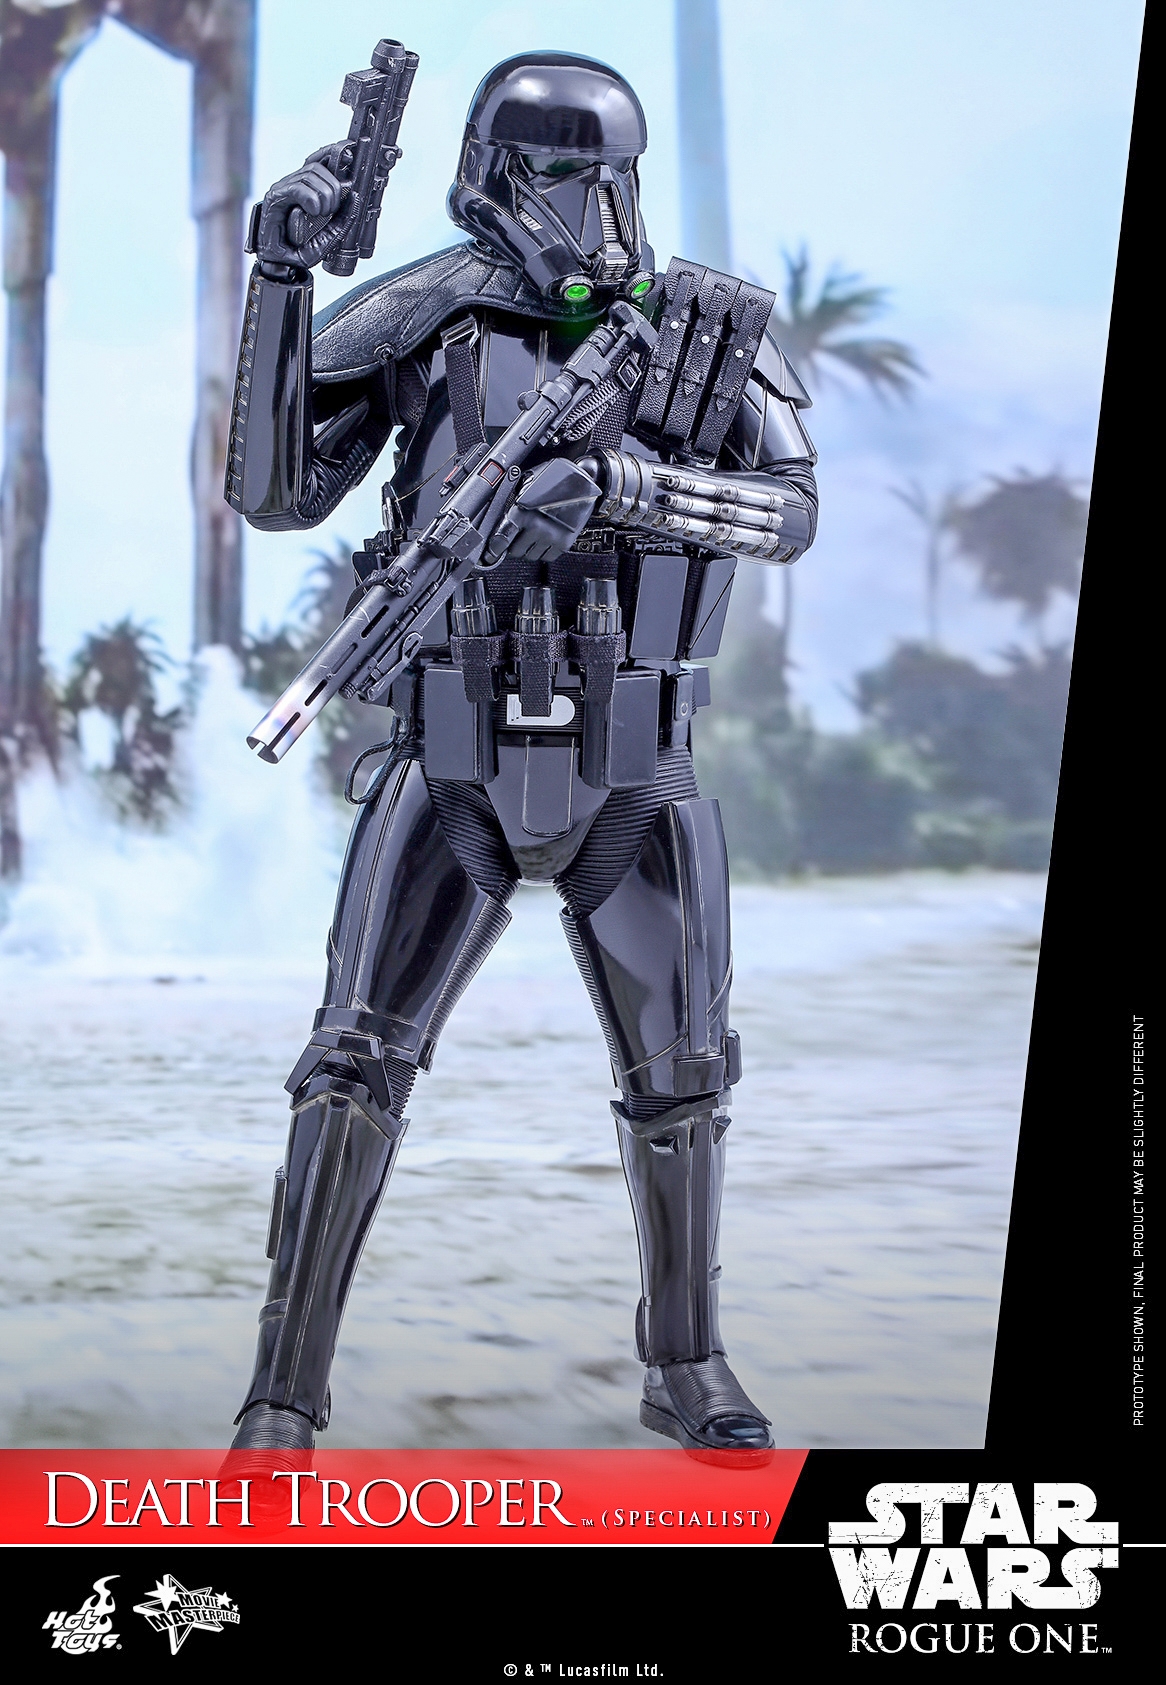 Hot-Toys-MMS385-Rogue-One-Death-Trooper-Specialist-006.jpg